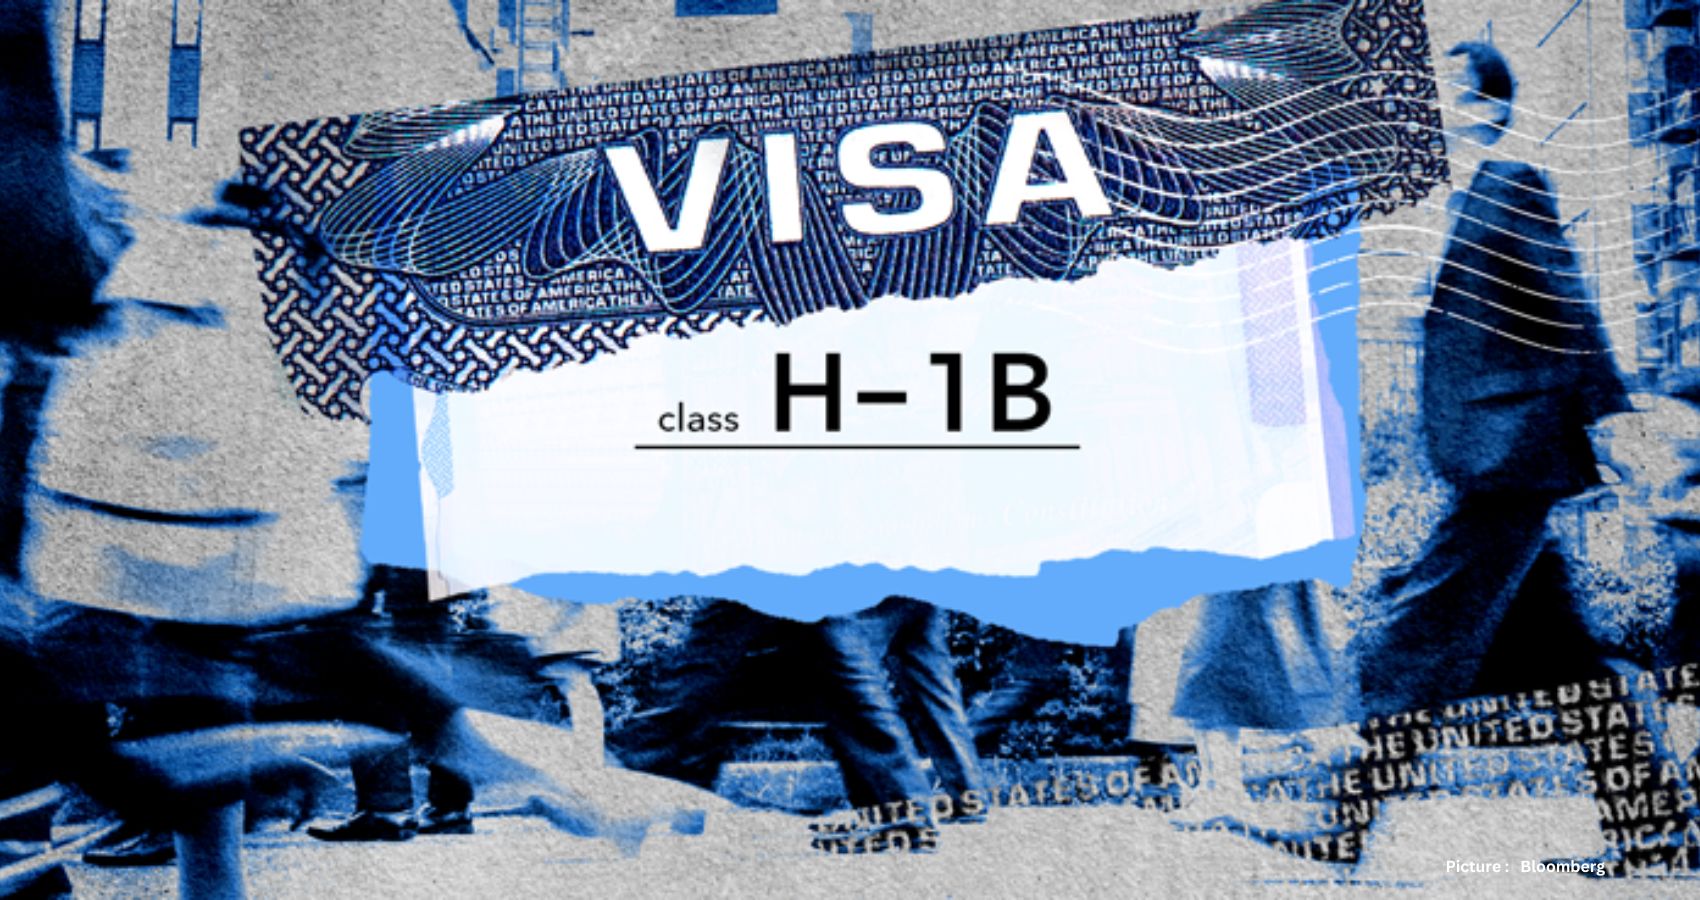 Featured & Cover State Department Launches Pilot Program Allowing H 1B Visa Renewals Within US Borders